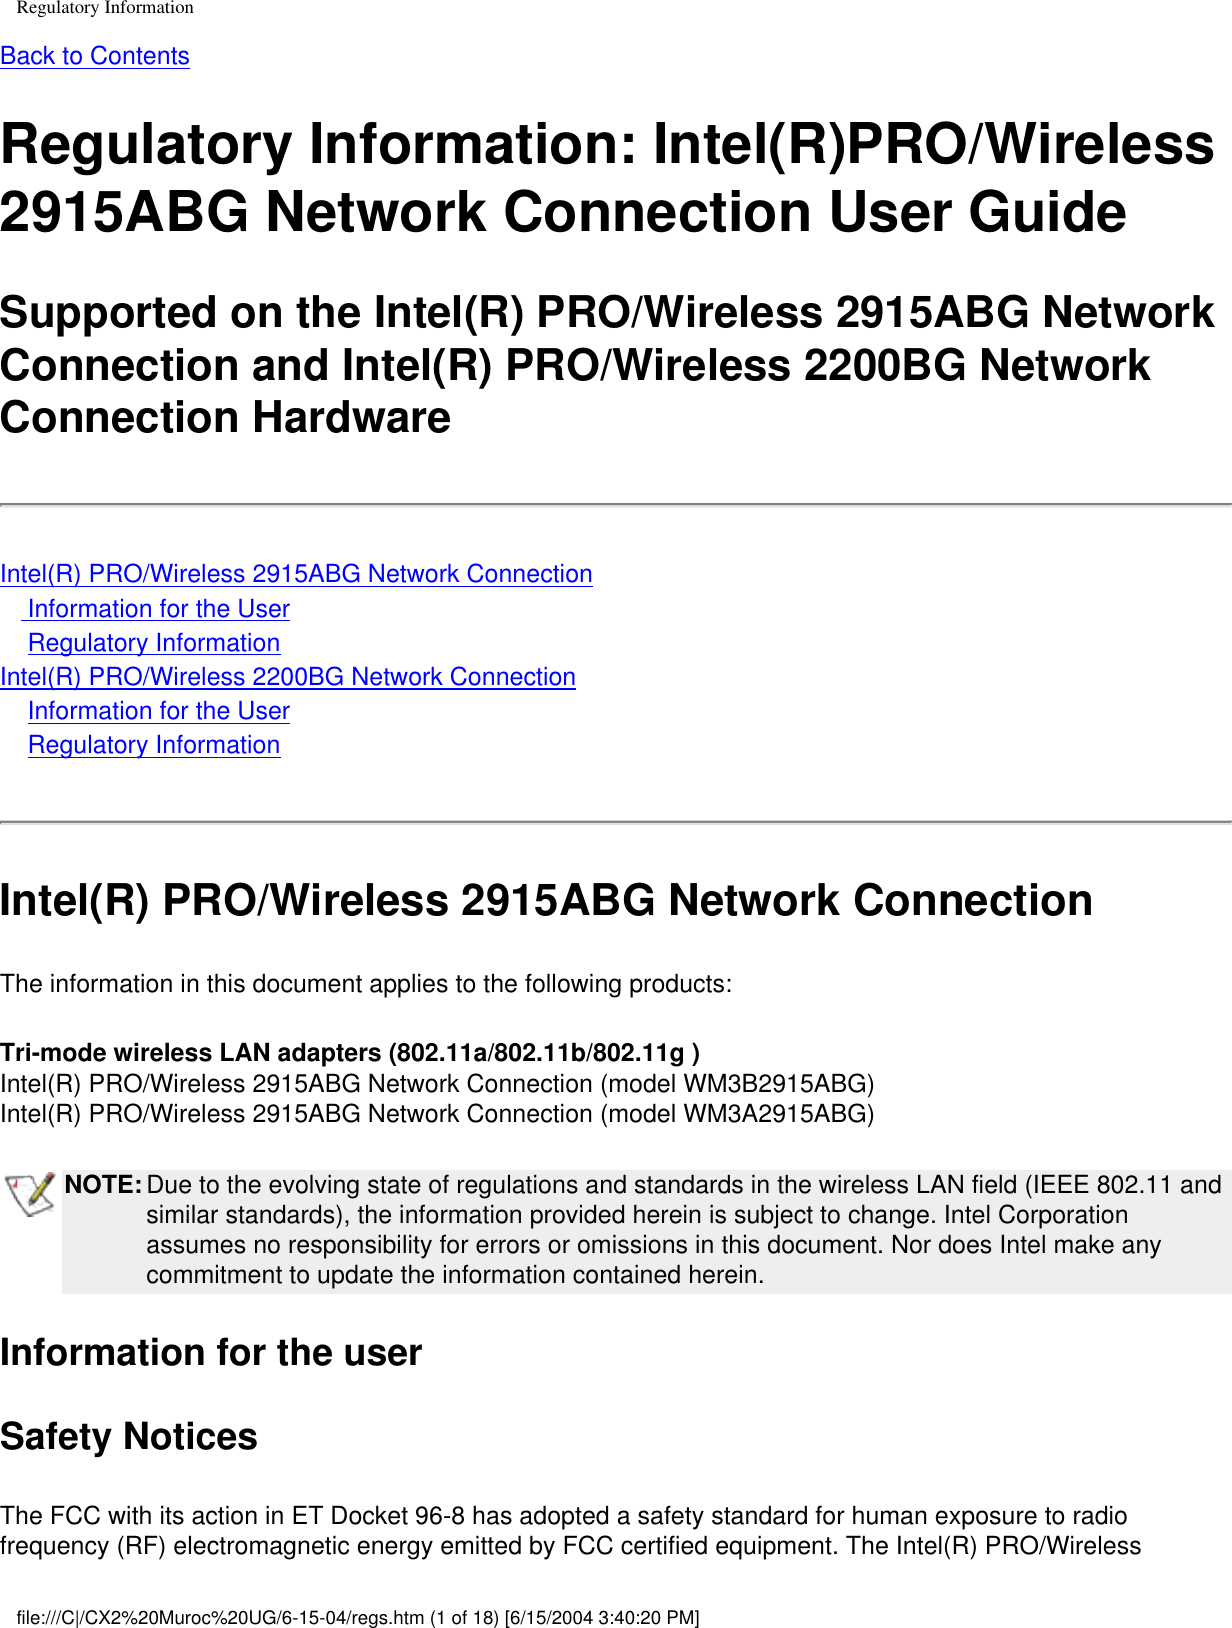 Regulatory InformationBack to ContentsRegulatory Information: Intel(R)PRO/Wireless 2915ABG Network Connection User GuideSupported on the Intel(R) PRO/Wireless 2915ABG Network Connection and Intel(R) PRO/Wireless 2200BG Network Connection HardwareIntel(R) PRO/Wireless 2915ABG Network Connection    Information for the User    Regulatory InformationIntel(R) PRO/Wireless 2200BG Network Connection    Information for the User    Regulatory InformationIntel(R) PRO/Wireless 2915ABG Network ConnectionThe information in this document applies to the following products:Tri-mode wireless LAN adapters (802.11a/802.11b/802.11g )Intel(R) PRO/Wireless 2915ABG Network Connection (model WM3B2915ABG)Intel(R) PRO/Wireless 2915ABG Network Connection (model WM3A2915ABG)NOTE: Due to the evolving state of regulations and standards in the wireless LAN field (IEEE 802.11 and similar standards), the information provided herein is subject to change. Intel Corporation assumes no responsibility for errors or omissions in this document. Nor does Intel make any commitment to update the information contained herein.Information for the userSafety NoticesThe FCC with its action in ET Docket 96-8 has adopted a safety standard for human exposure to radio frequency (RF) electromagnetic energy emitted by FCC certified equipment. The Intel(R) PRO/Wireless file:///C|/CX2%20Muroc%20UG/6-15-04/regs.htm (1 of 18) [6/15/2004 3:40:20 PM]